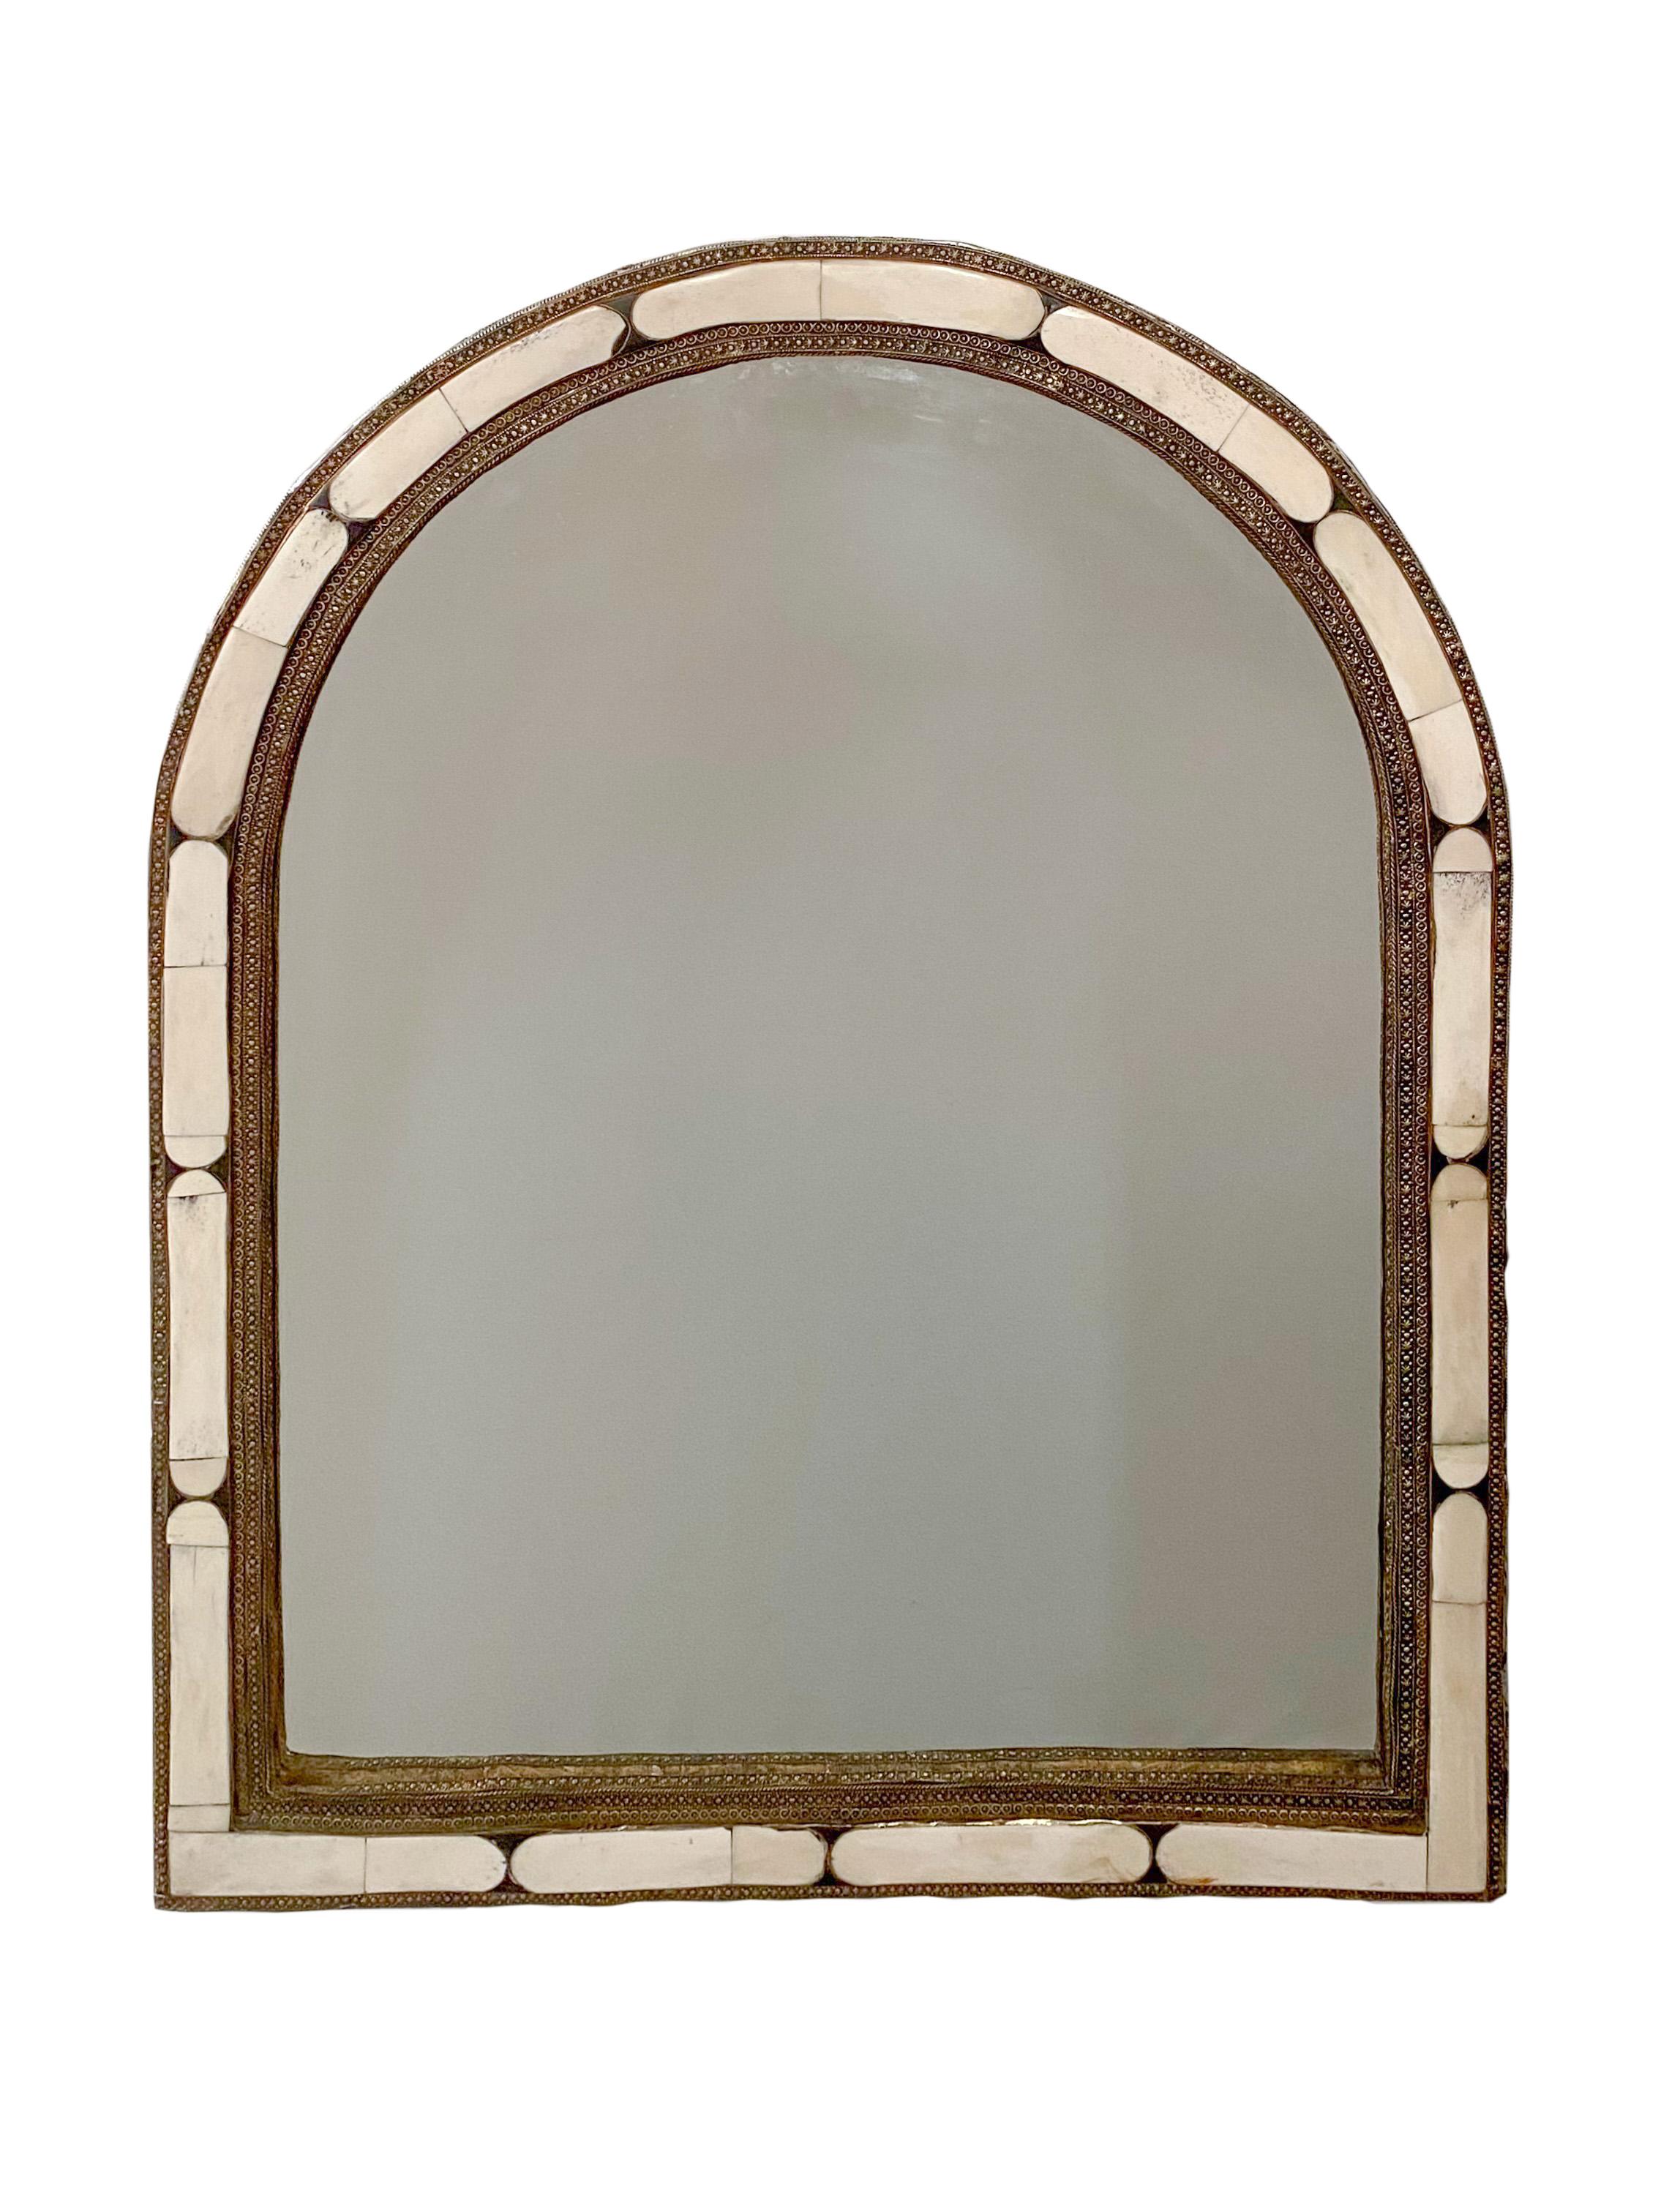 Arched Hollywood Regency White Camel Bone Mirror, a Pair A pair of arched white camel bone mirrors. With white camel bones inlaid into an elegant brass frame, this pair of handmade Hollywood Regency mirrors will complement any room and interior